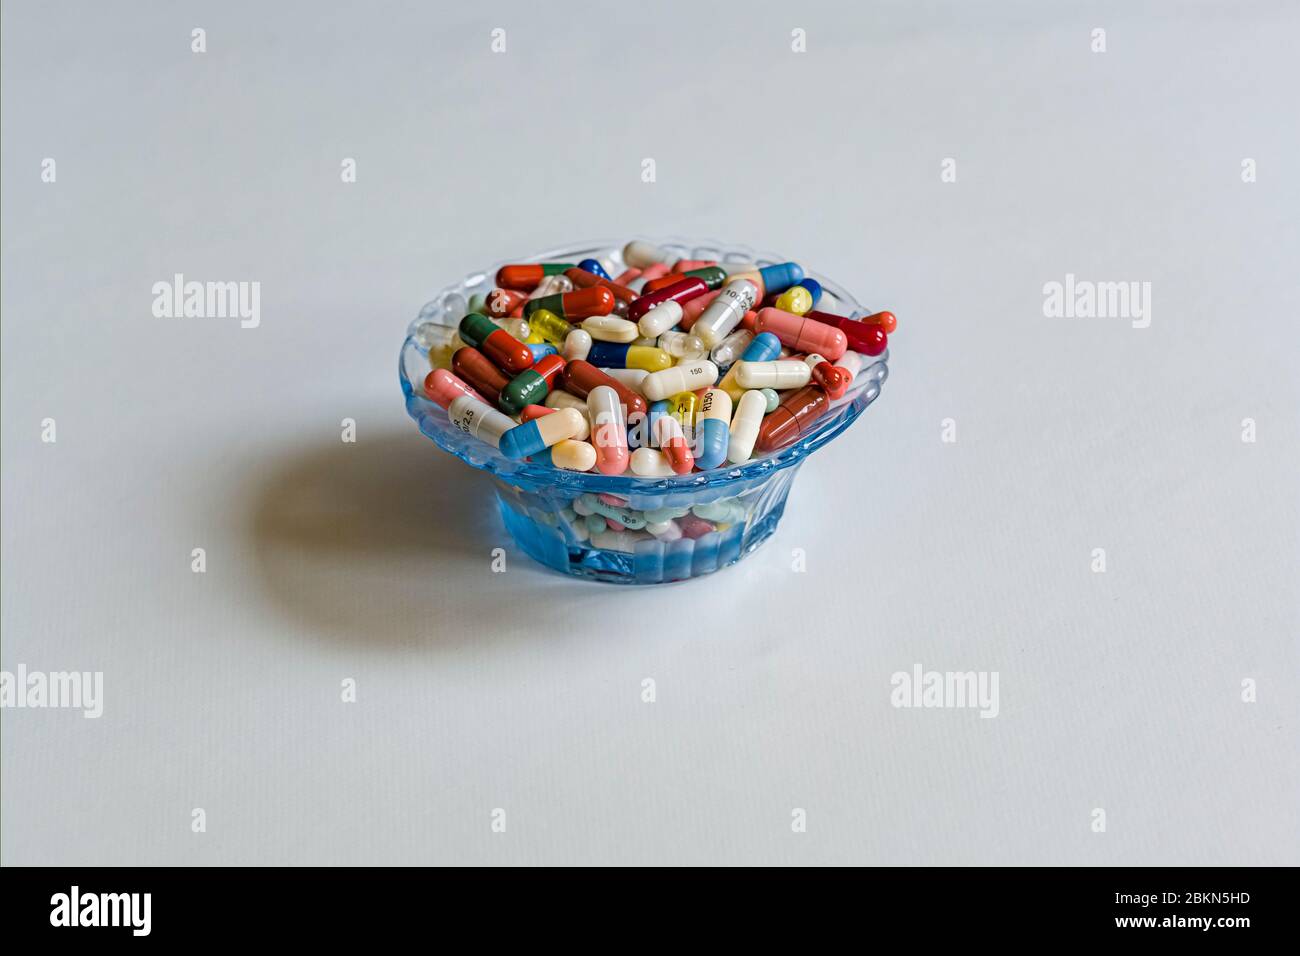 A small dish filled with differently colored medical capsules, displayed on a white table Stock Photo